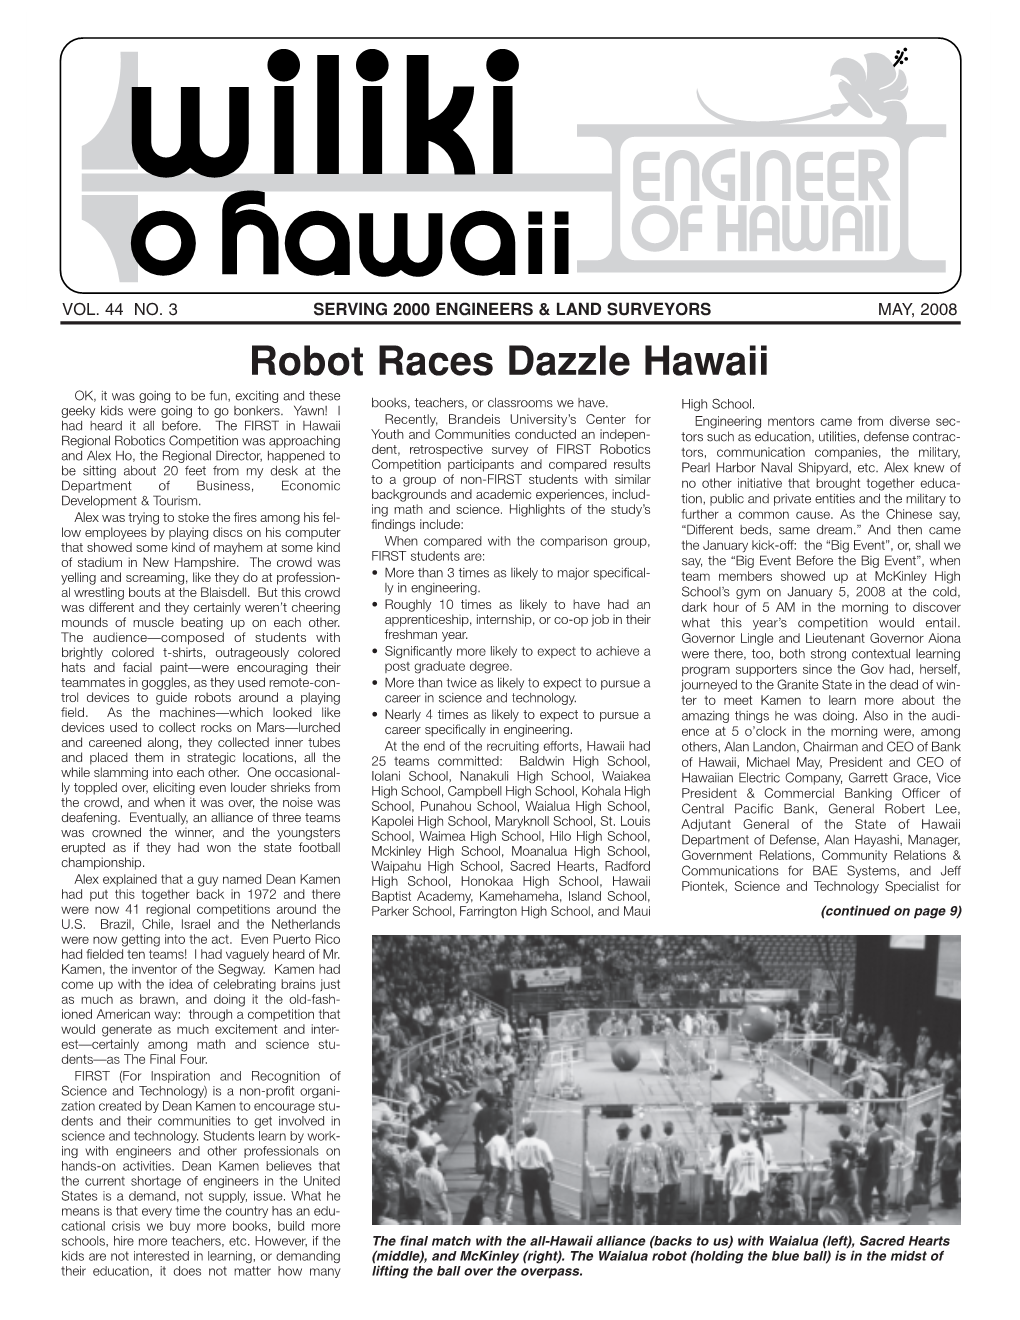 Robot Races Dazzle Hawaii OK, It Was Going to Be Fun, Exciting and These Books, Teachers, Or Classrooms We Have